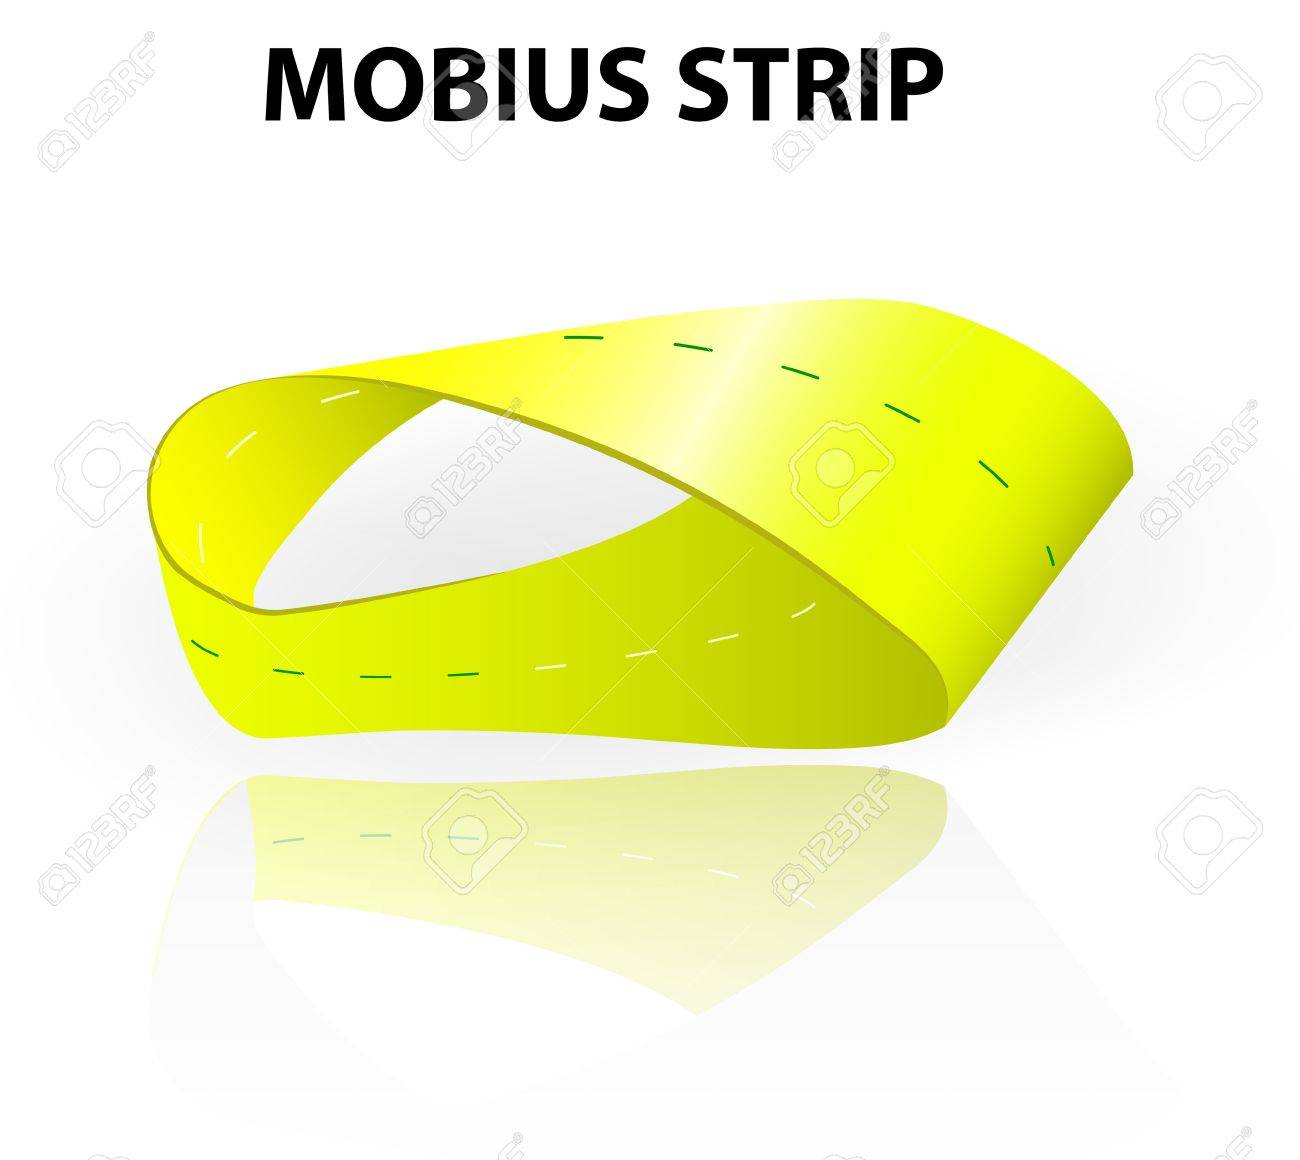 Mobius strip one side